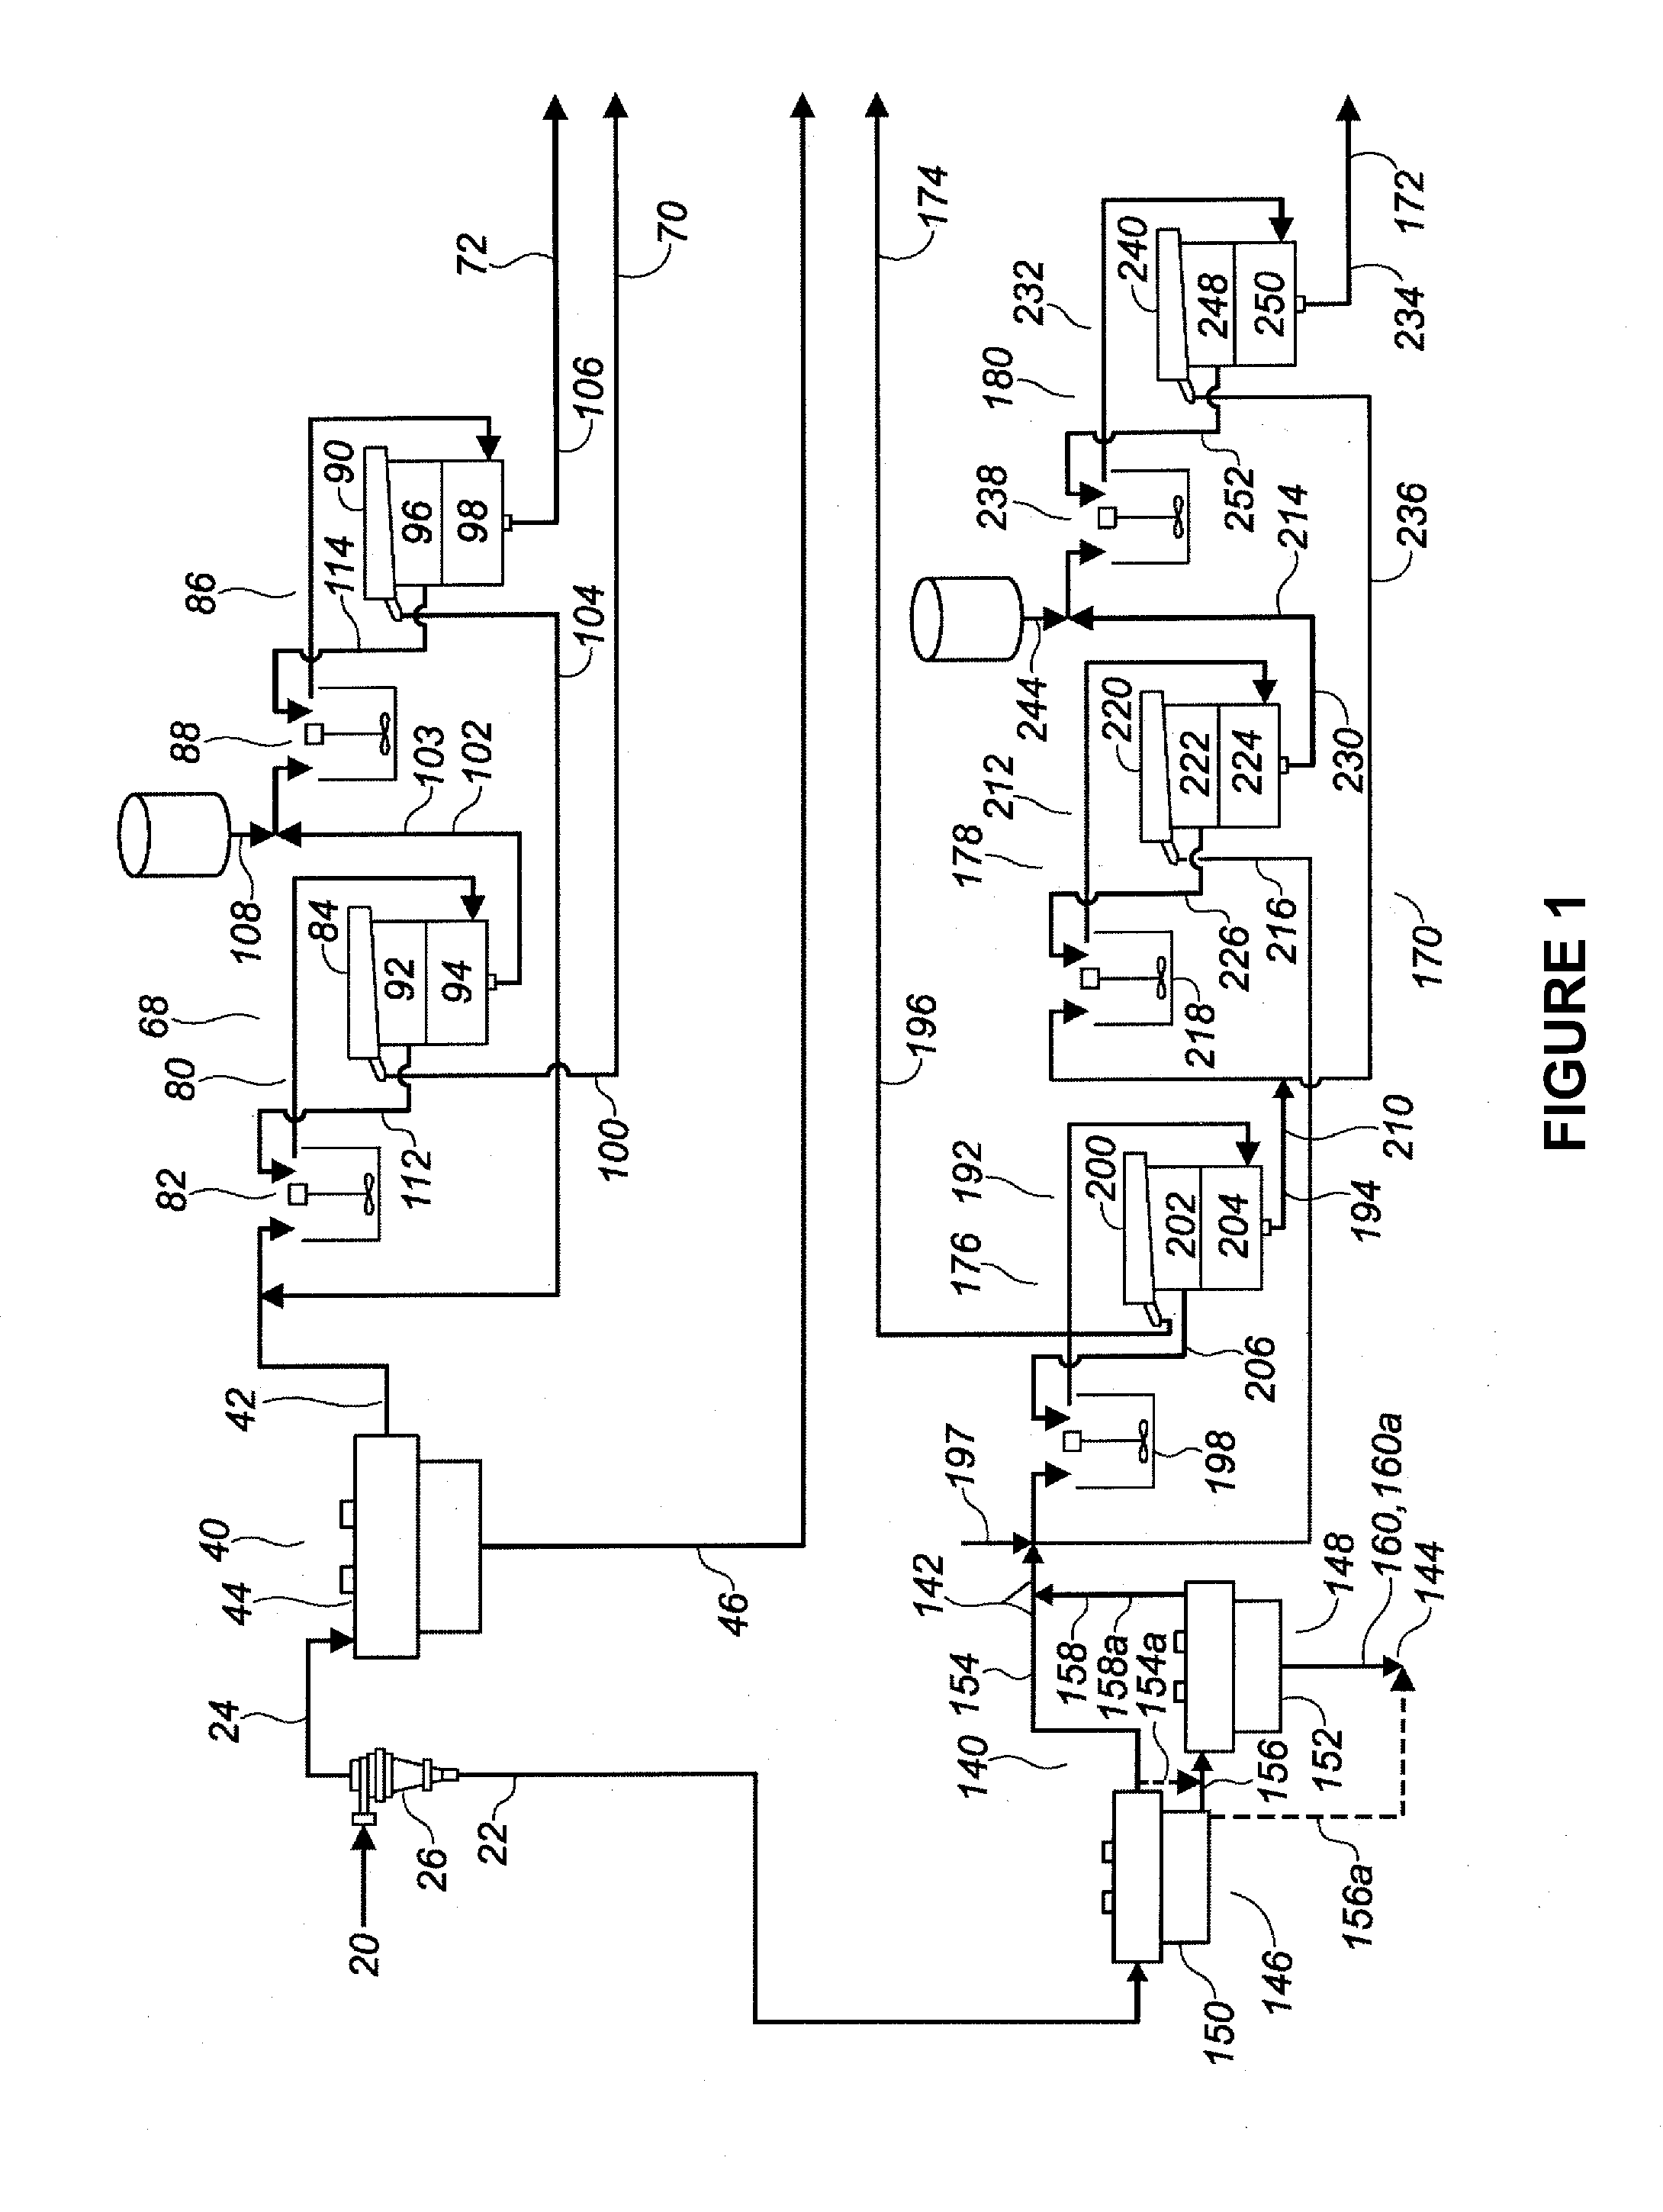 Methods for separating a feed material derived from a process for recovering bitumen from oil sands